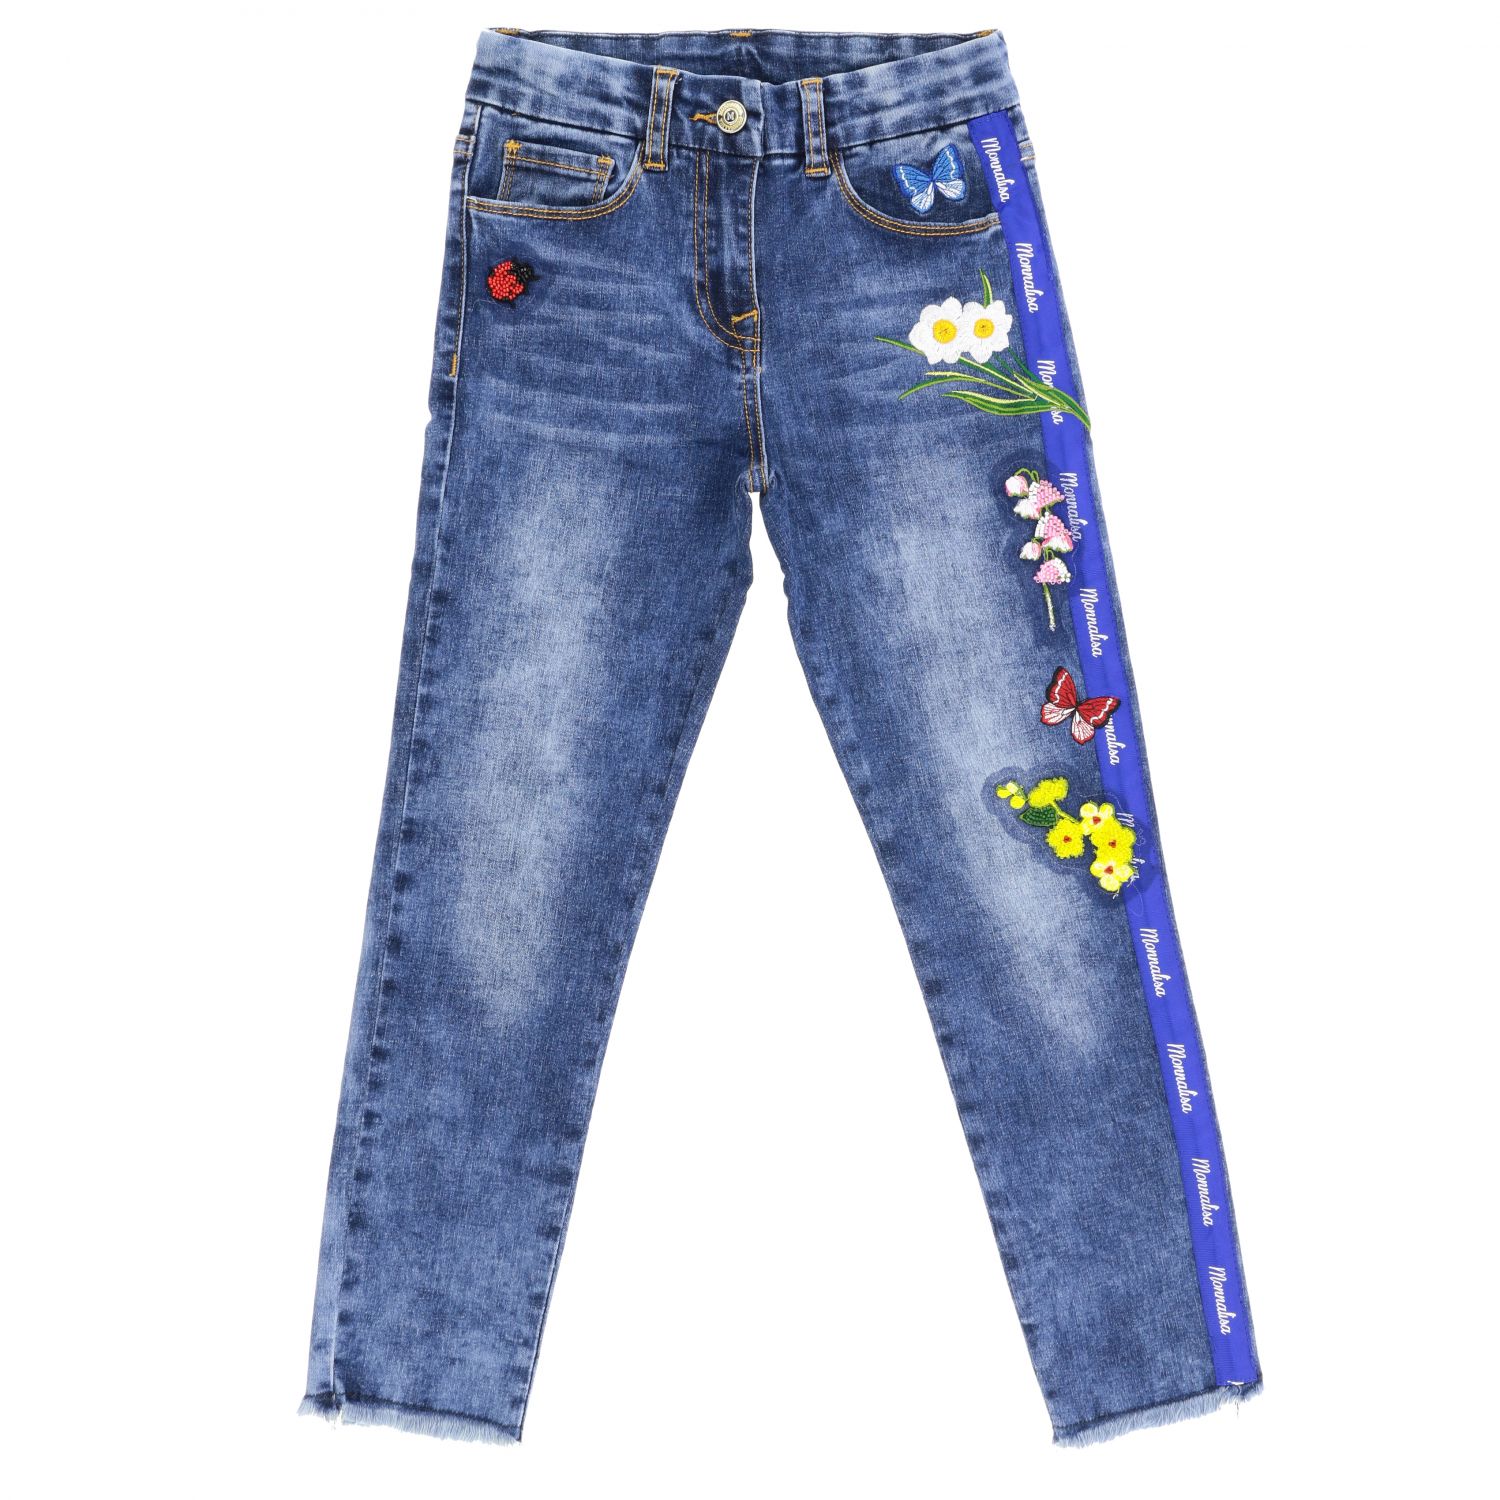 jeans with embroidery